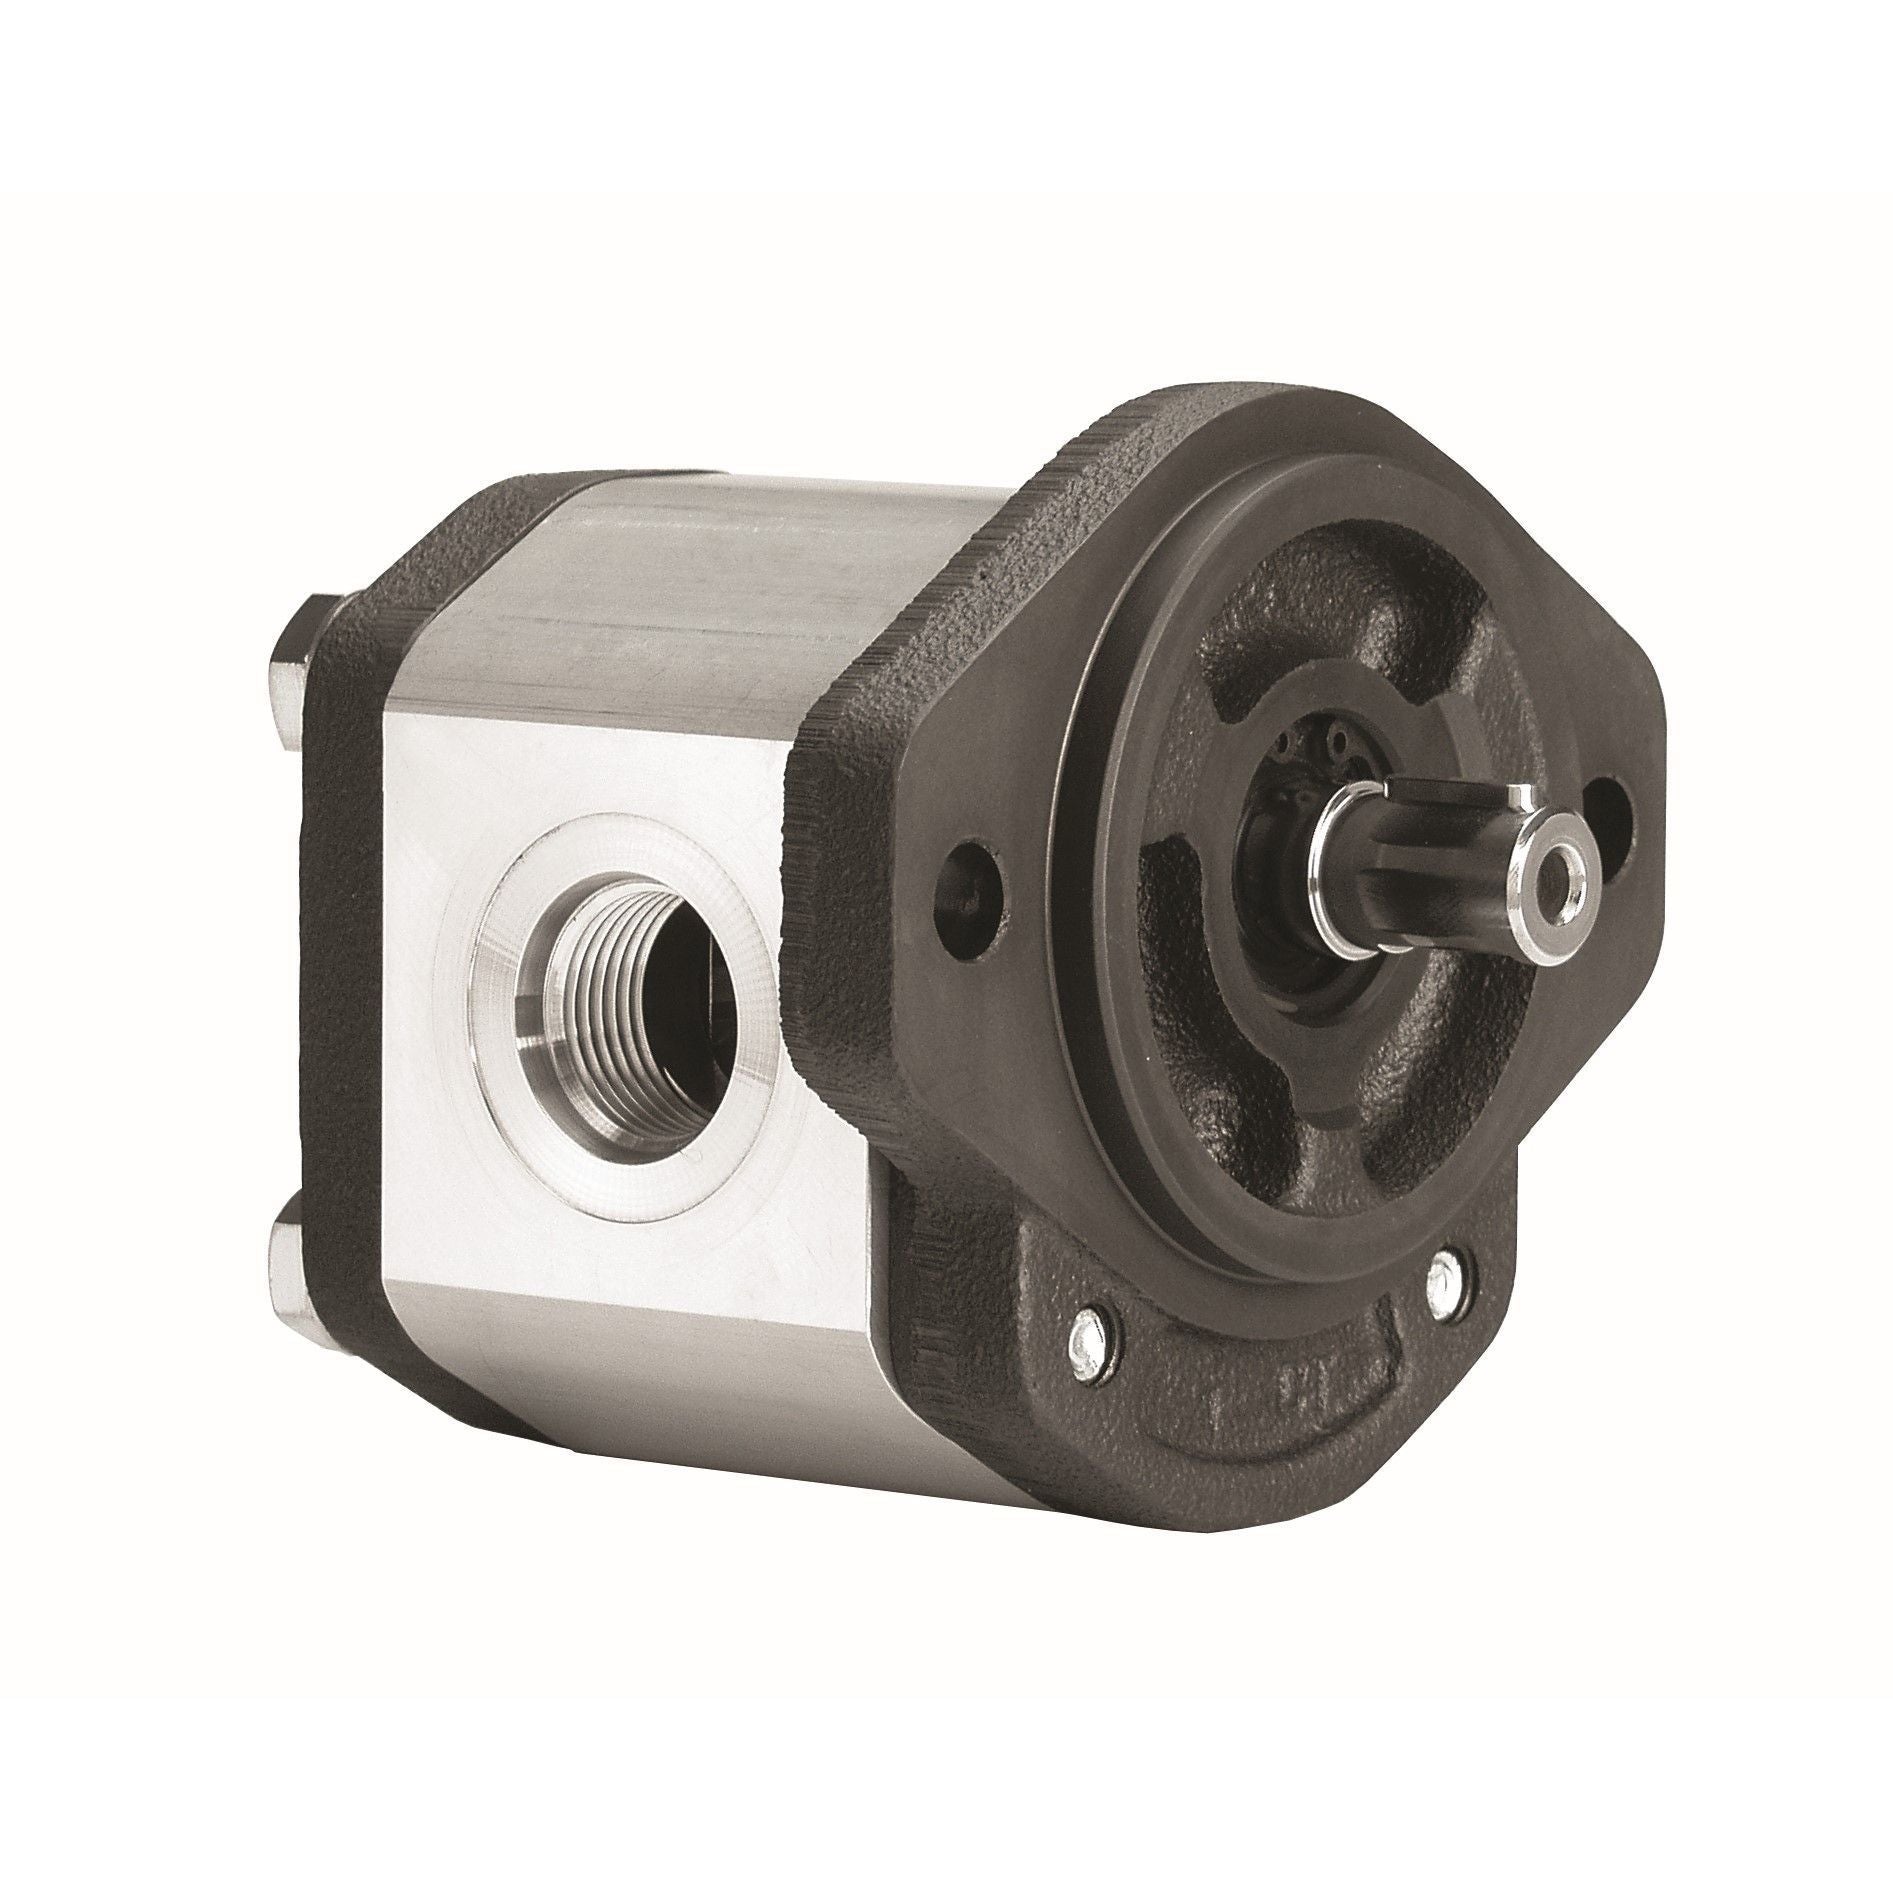 GHP1A-D-2 : Marzocchi Gear Pump, CW, 1.4cc (0.0854in3), 0.67 GPM, 3915psi, 6000 RPM, #8 SAE (1/2") In, #6 SAE (3/8") Out, Keyed Shaft 1/2" Bore x 1/8" Key, SAE AA 2-Bolt Mount